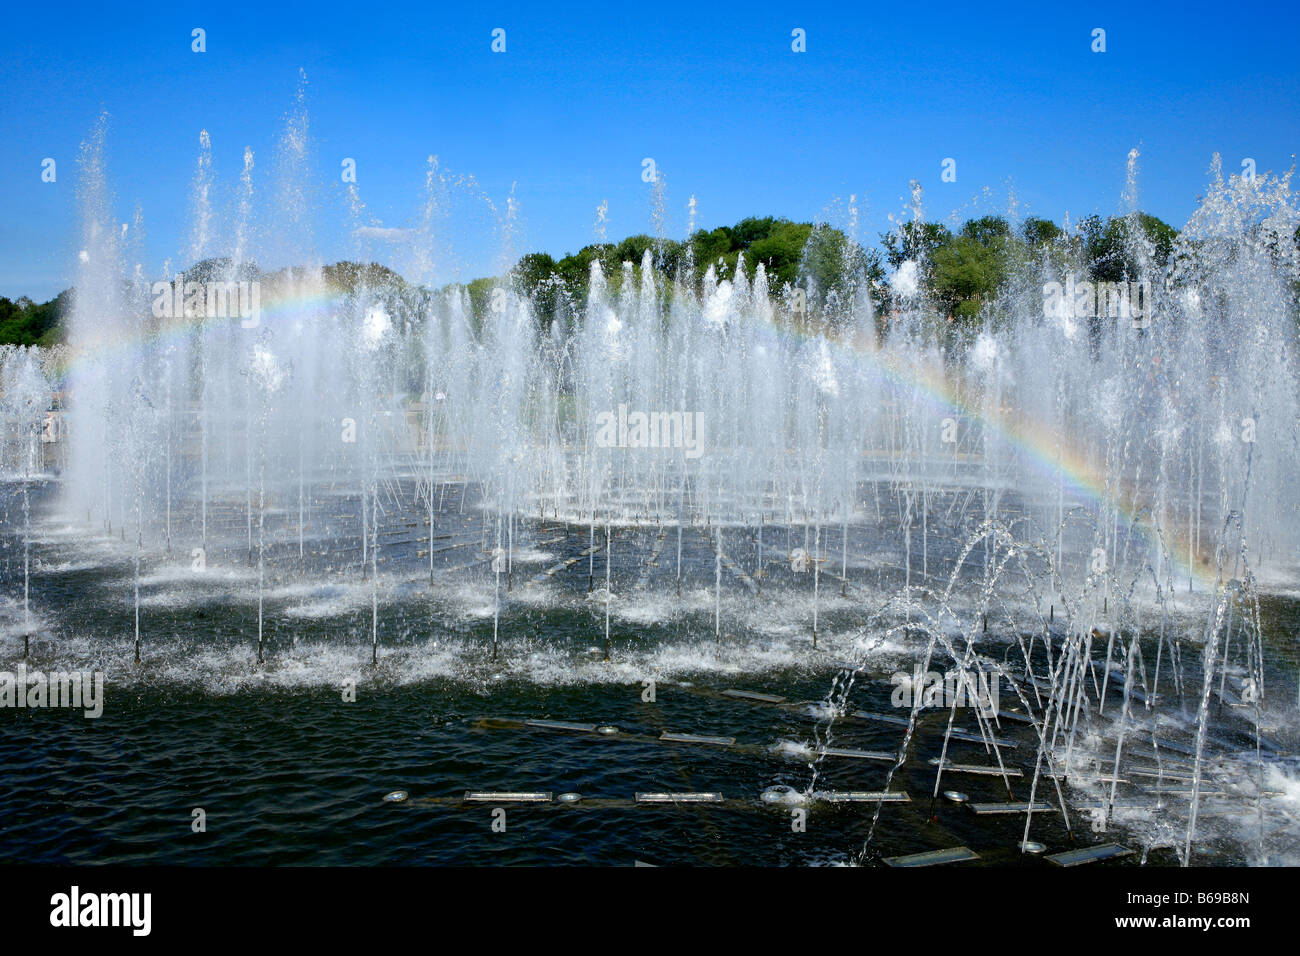 Musical fountain at the 18th century Neo-Gothic (Gothic Revival) Tsaritsyno estate in Moscow, Russia Stock Photo